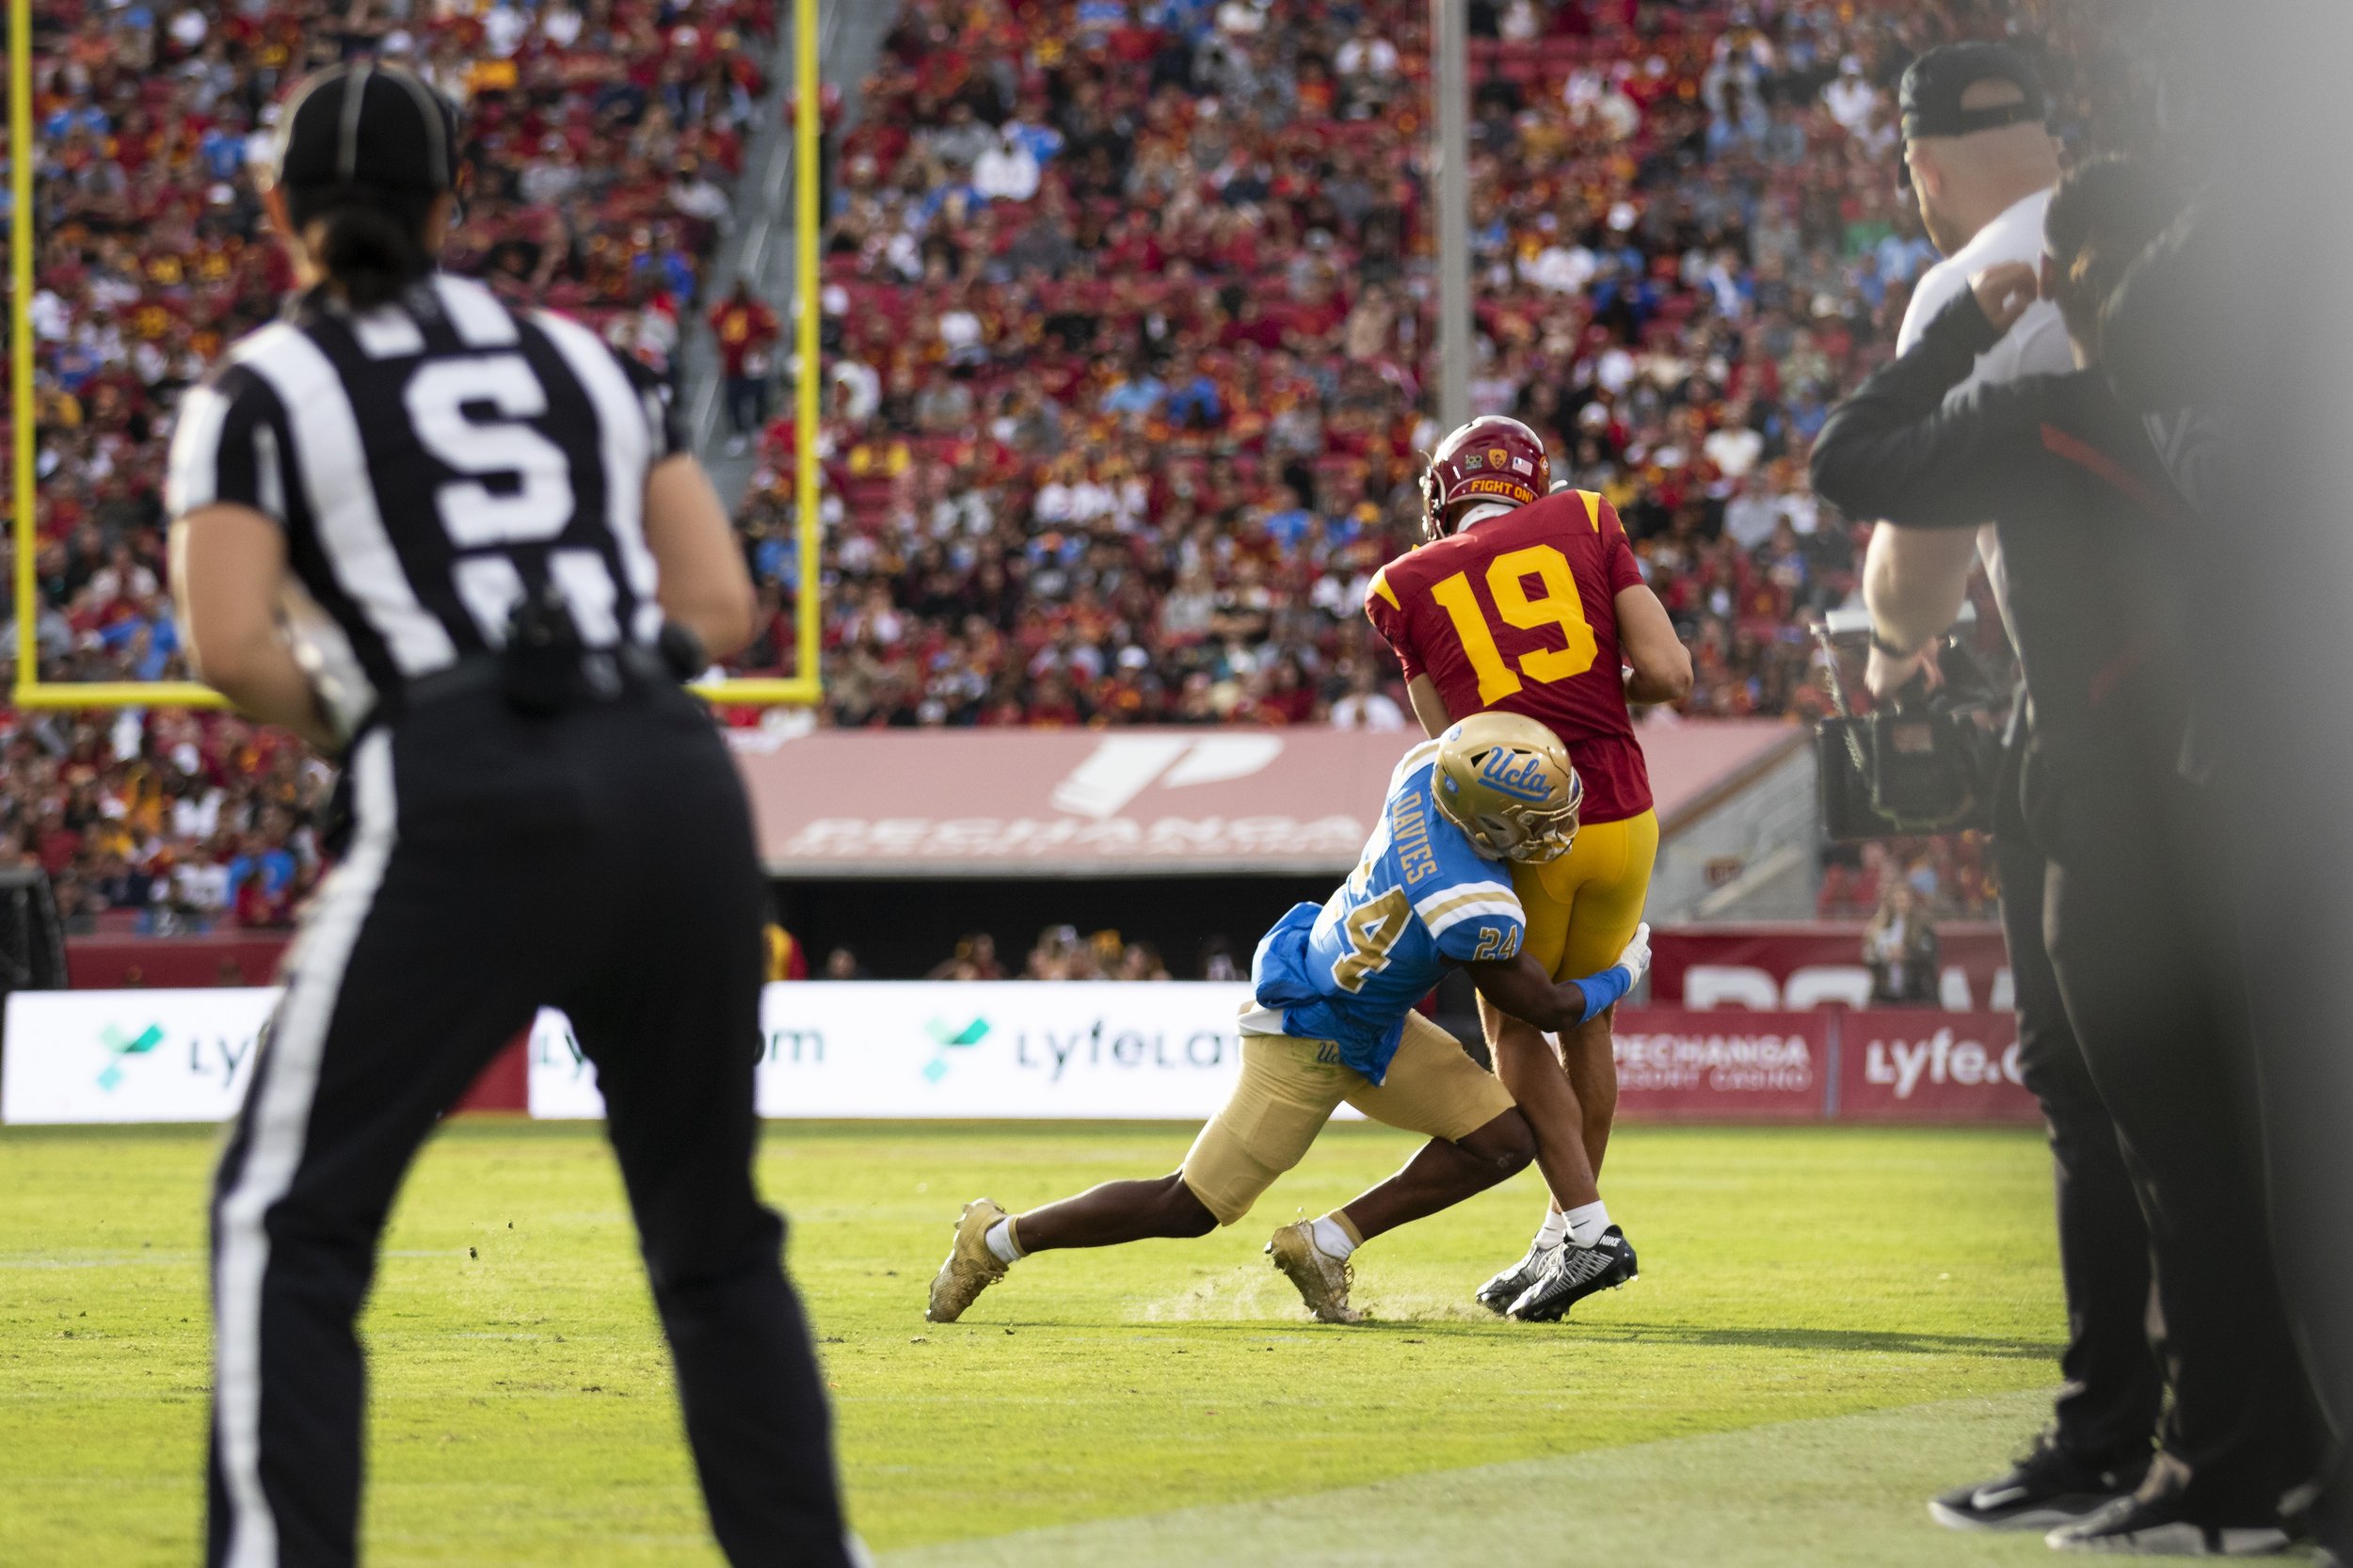  University of California, Los Angeles (UCLA) Bruin defensive back Jaylin Davies (left) tackling University of Southern California (USC) Trojan wide receiver Duce Robinson (right) during the third quarter of a football game at the Los Angeles Memoria